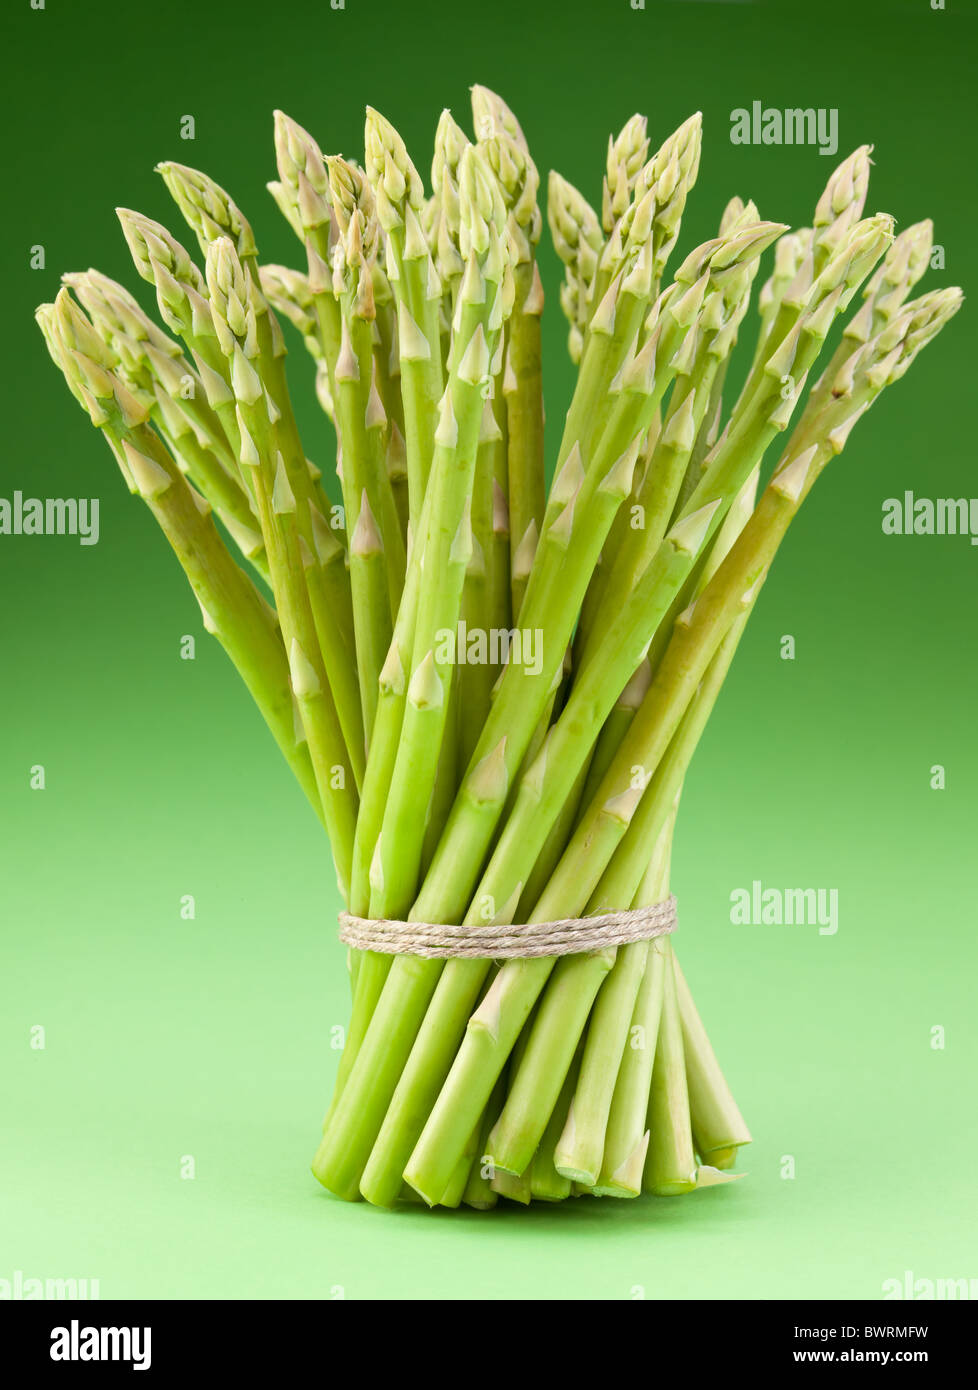 Sheaf of asparagus on a green background. Stock Photo